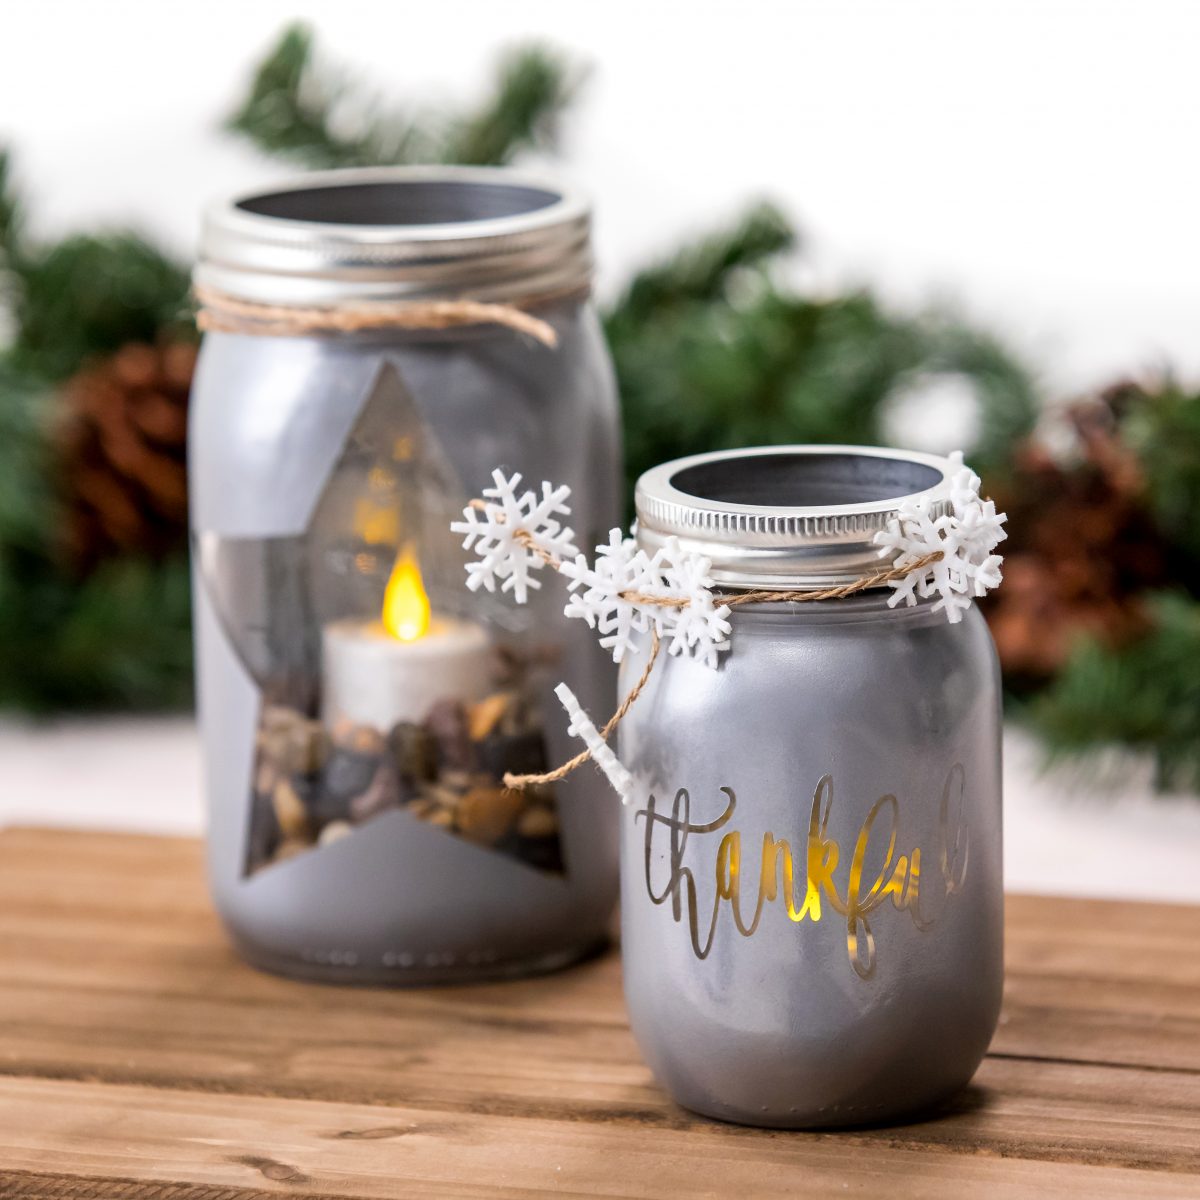 Gift crafts in jars